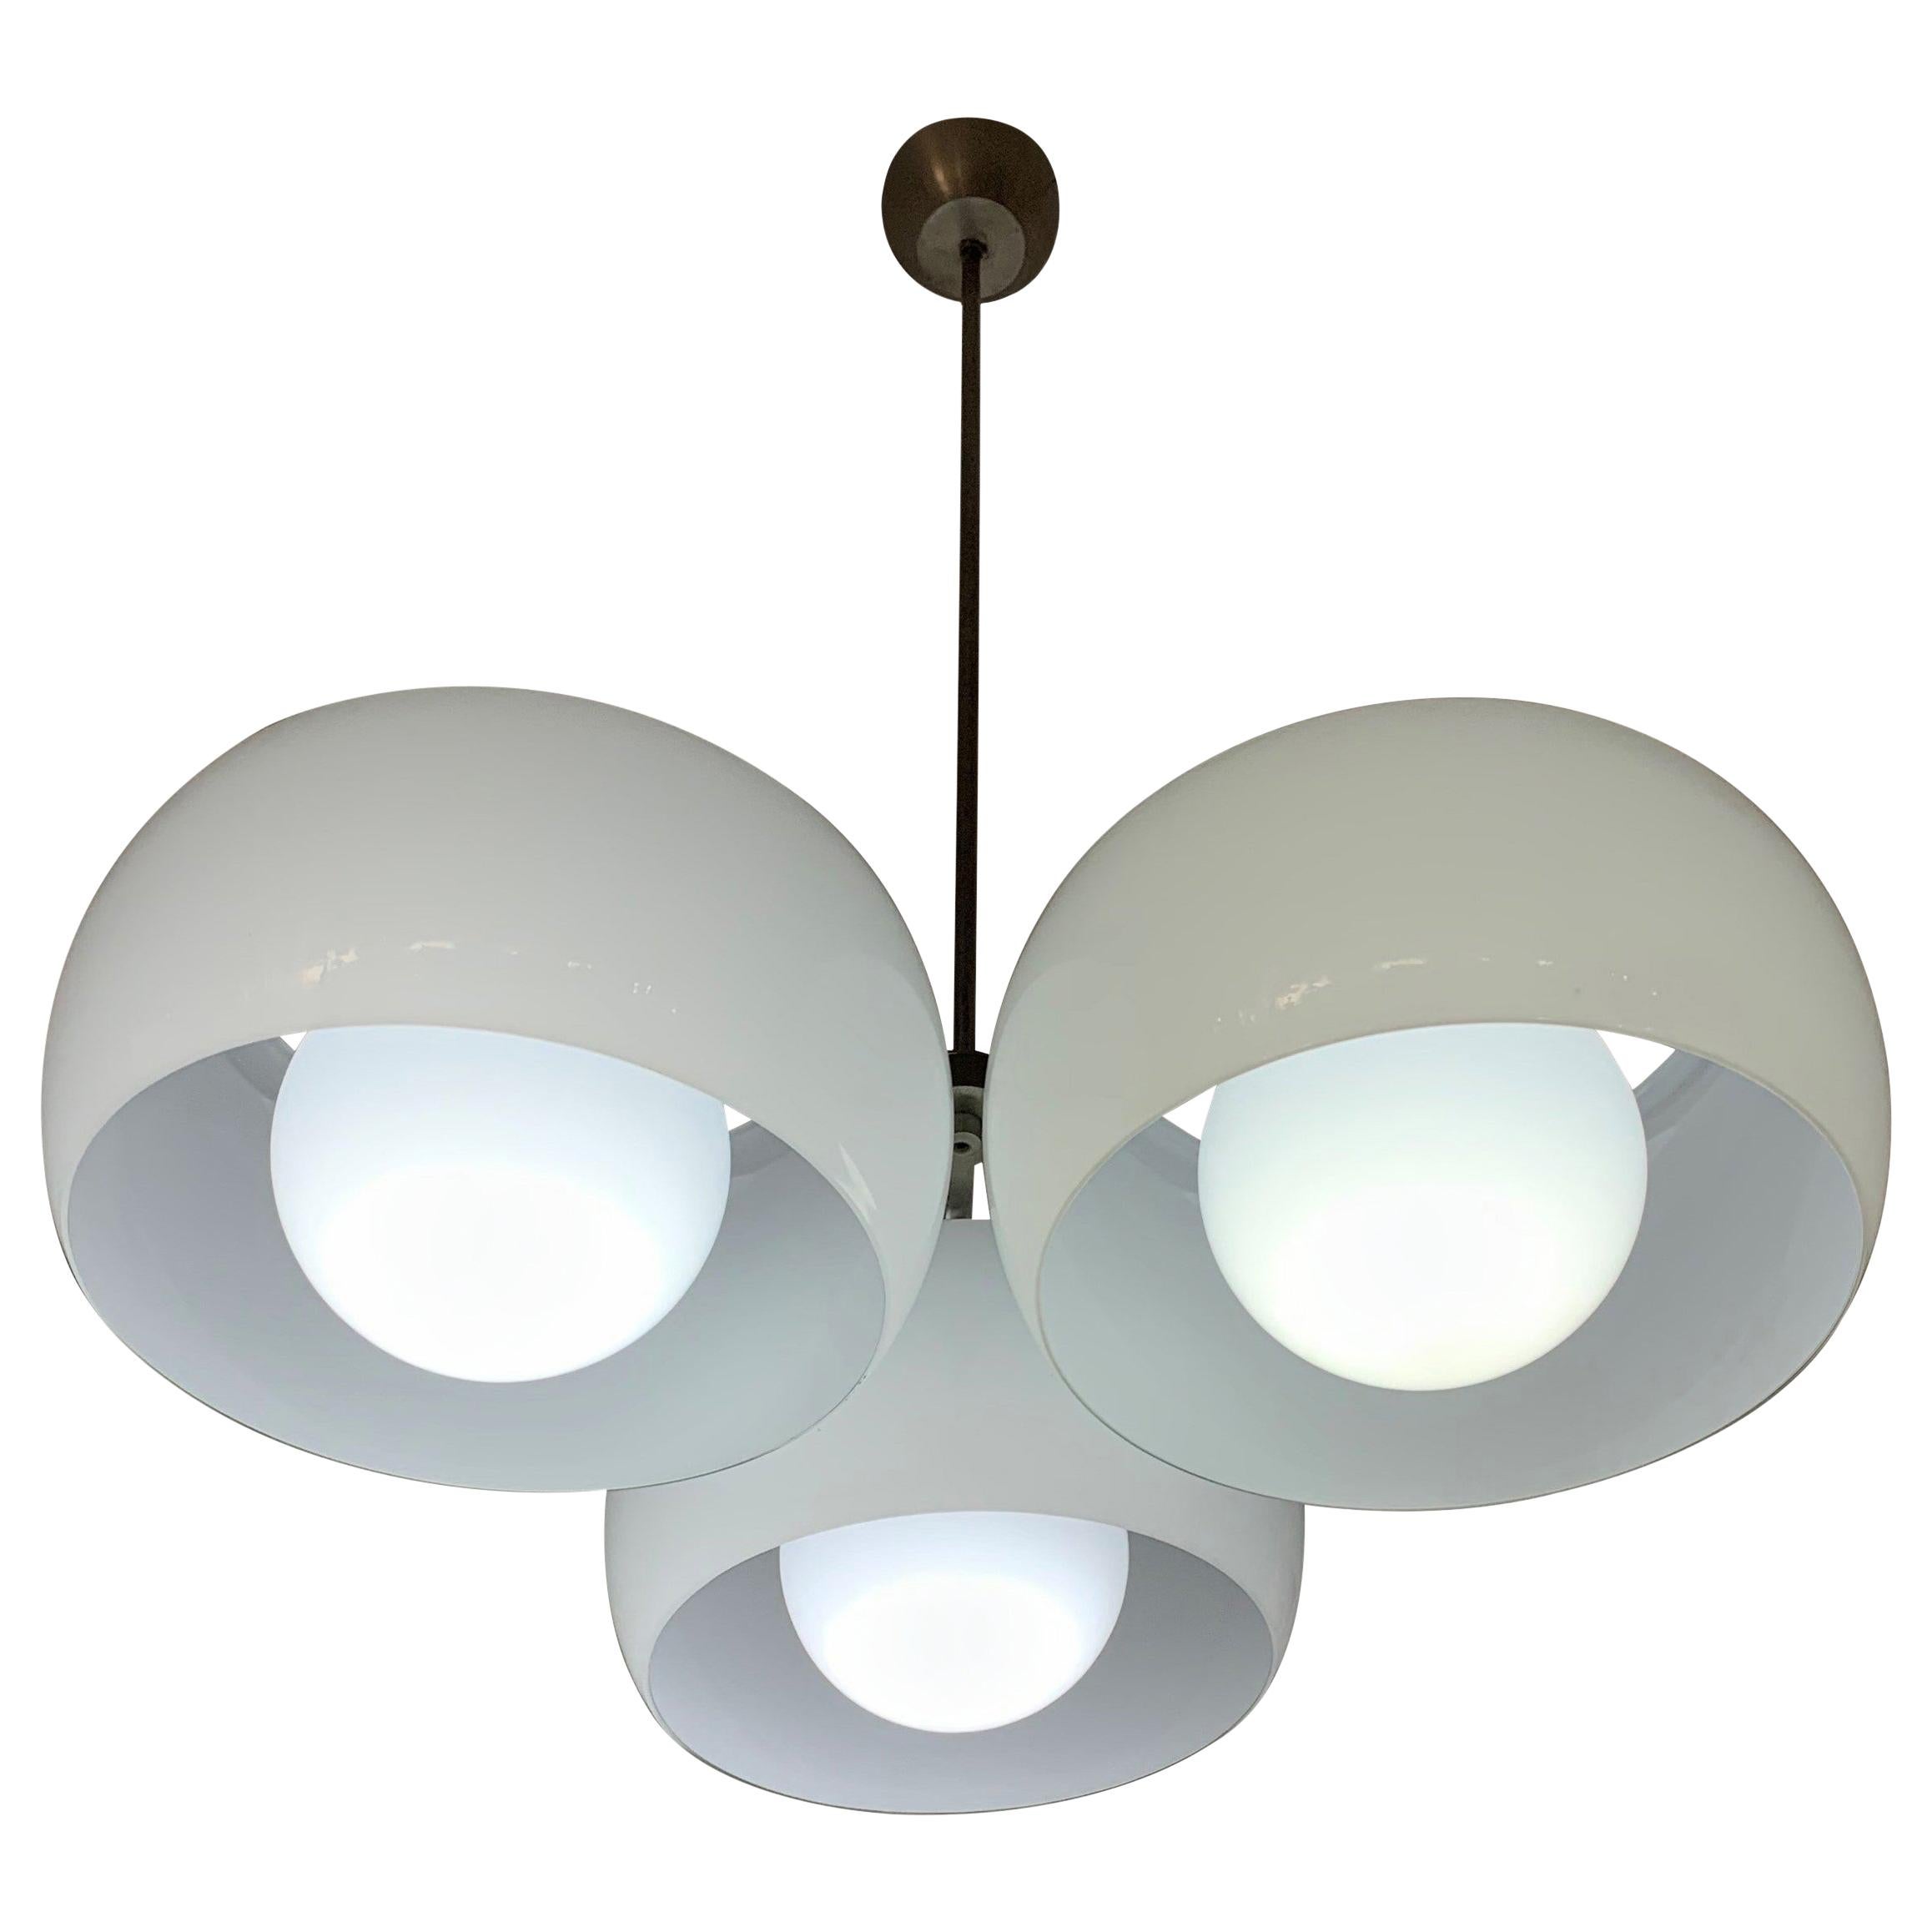 Mid-Century Modern "TriClinio" Chandelier by Vico Magistretti for Artemide